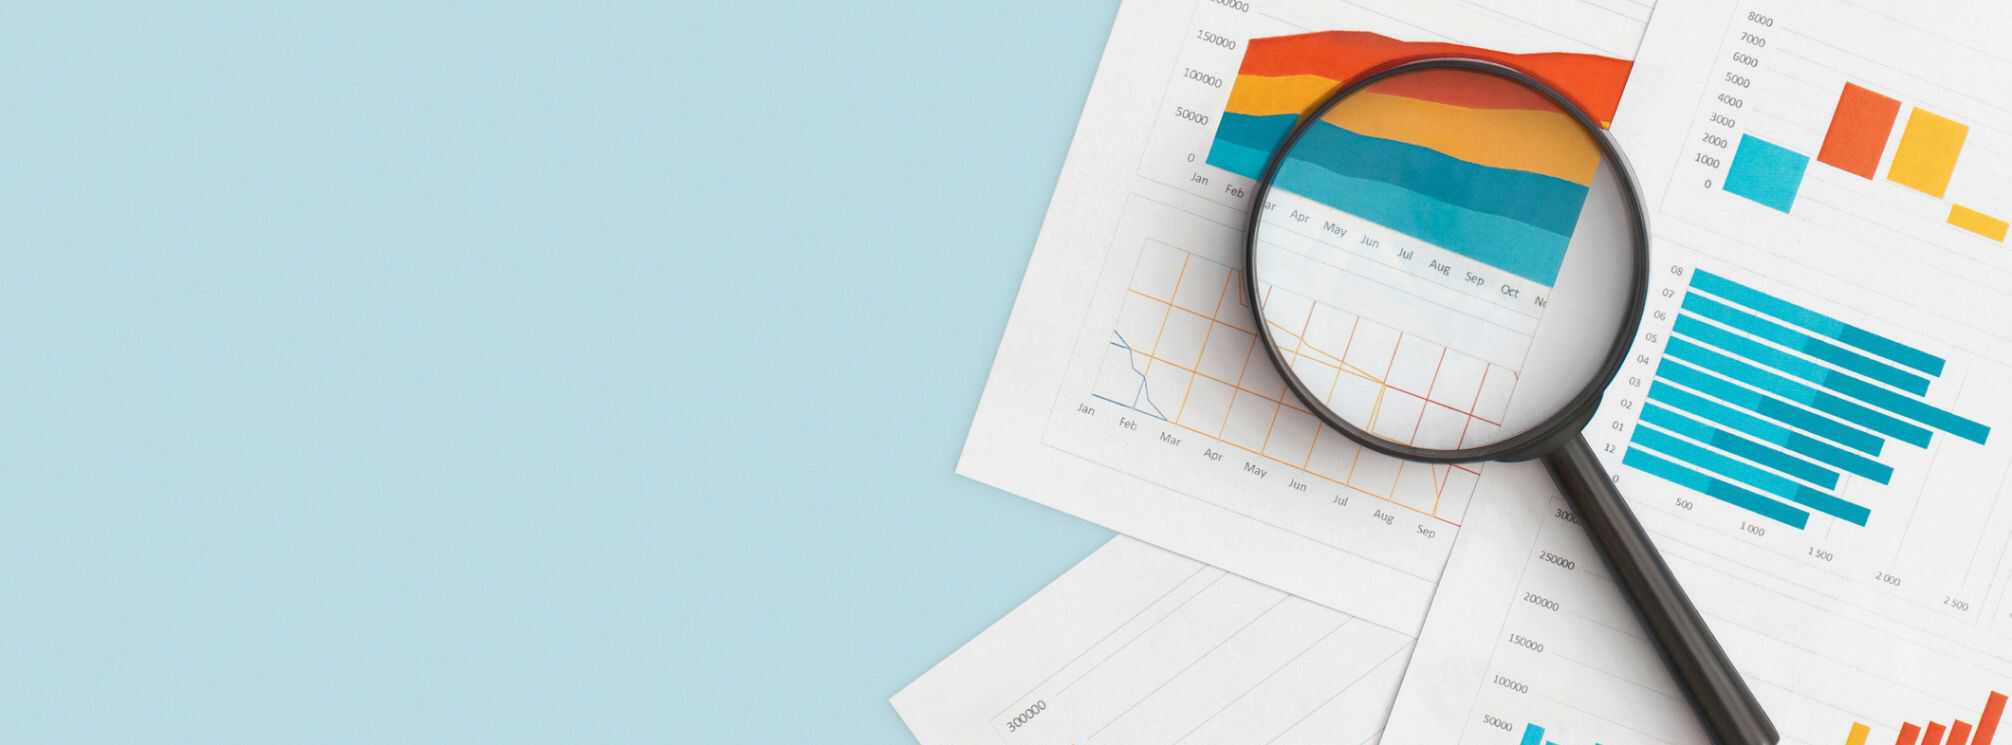 magnifying glass over papers with analytics charts on them